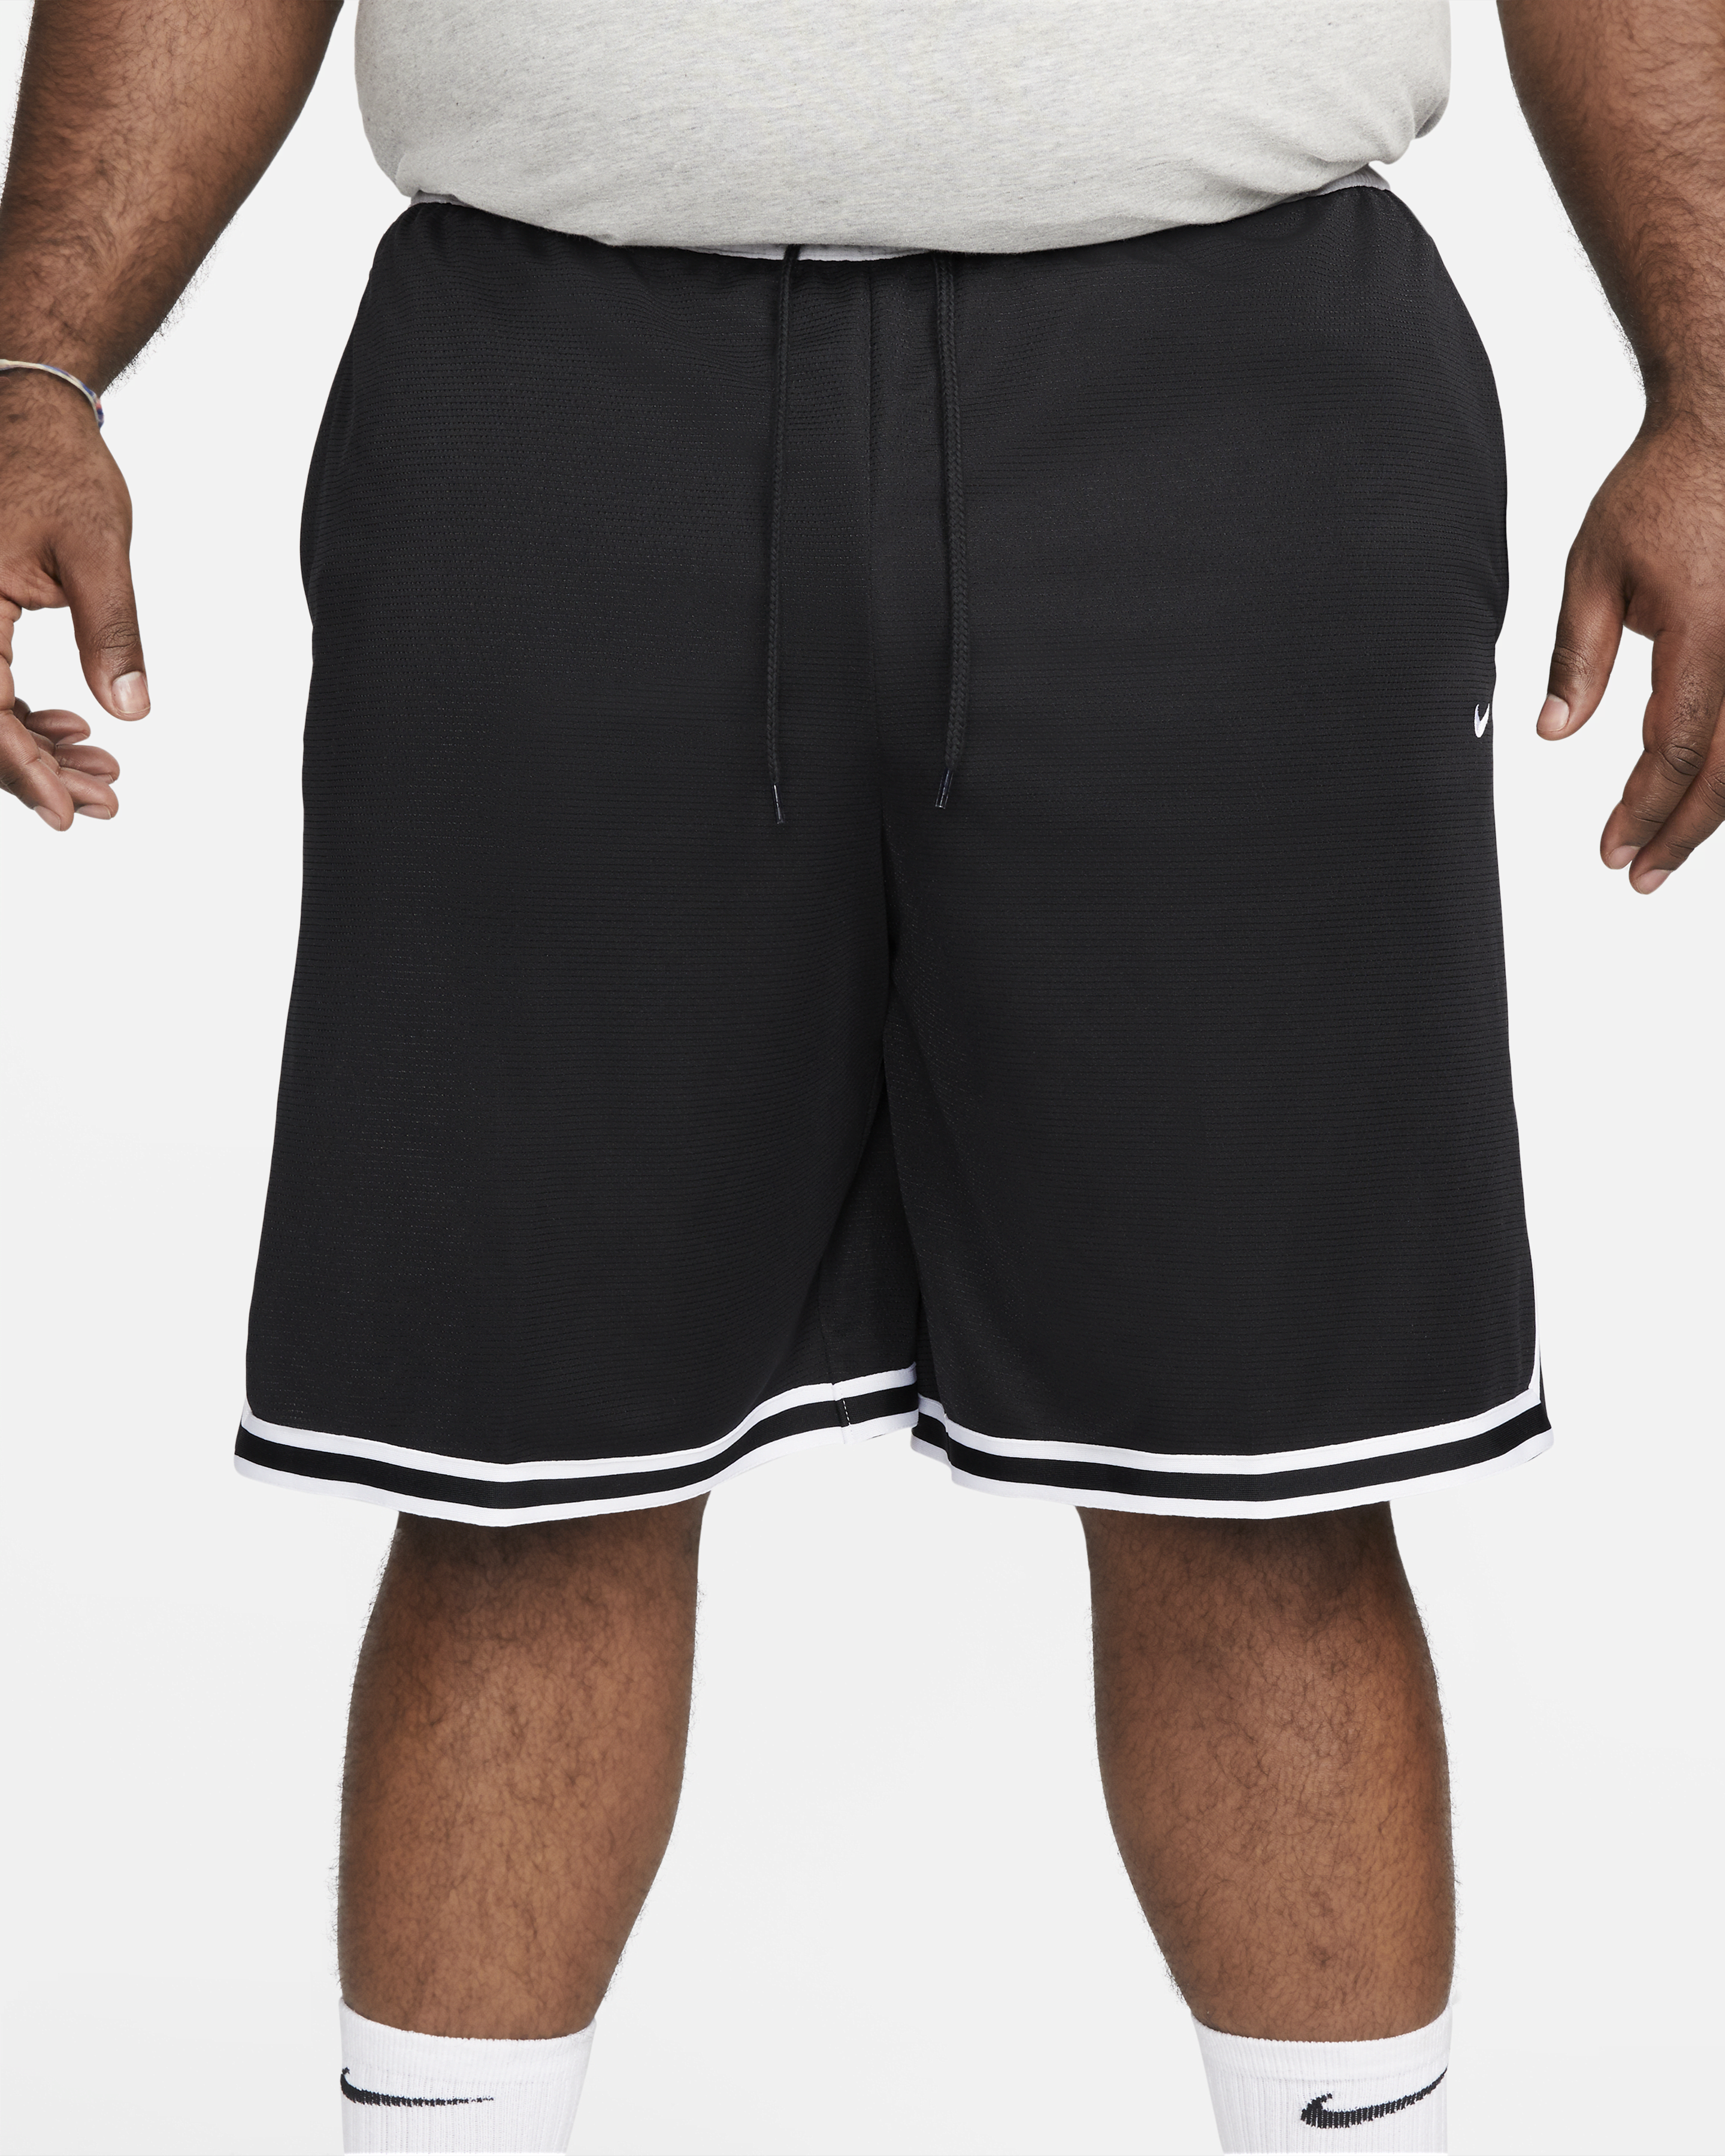 The Best Basketball Shorts for 2023